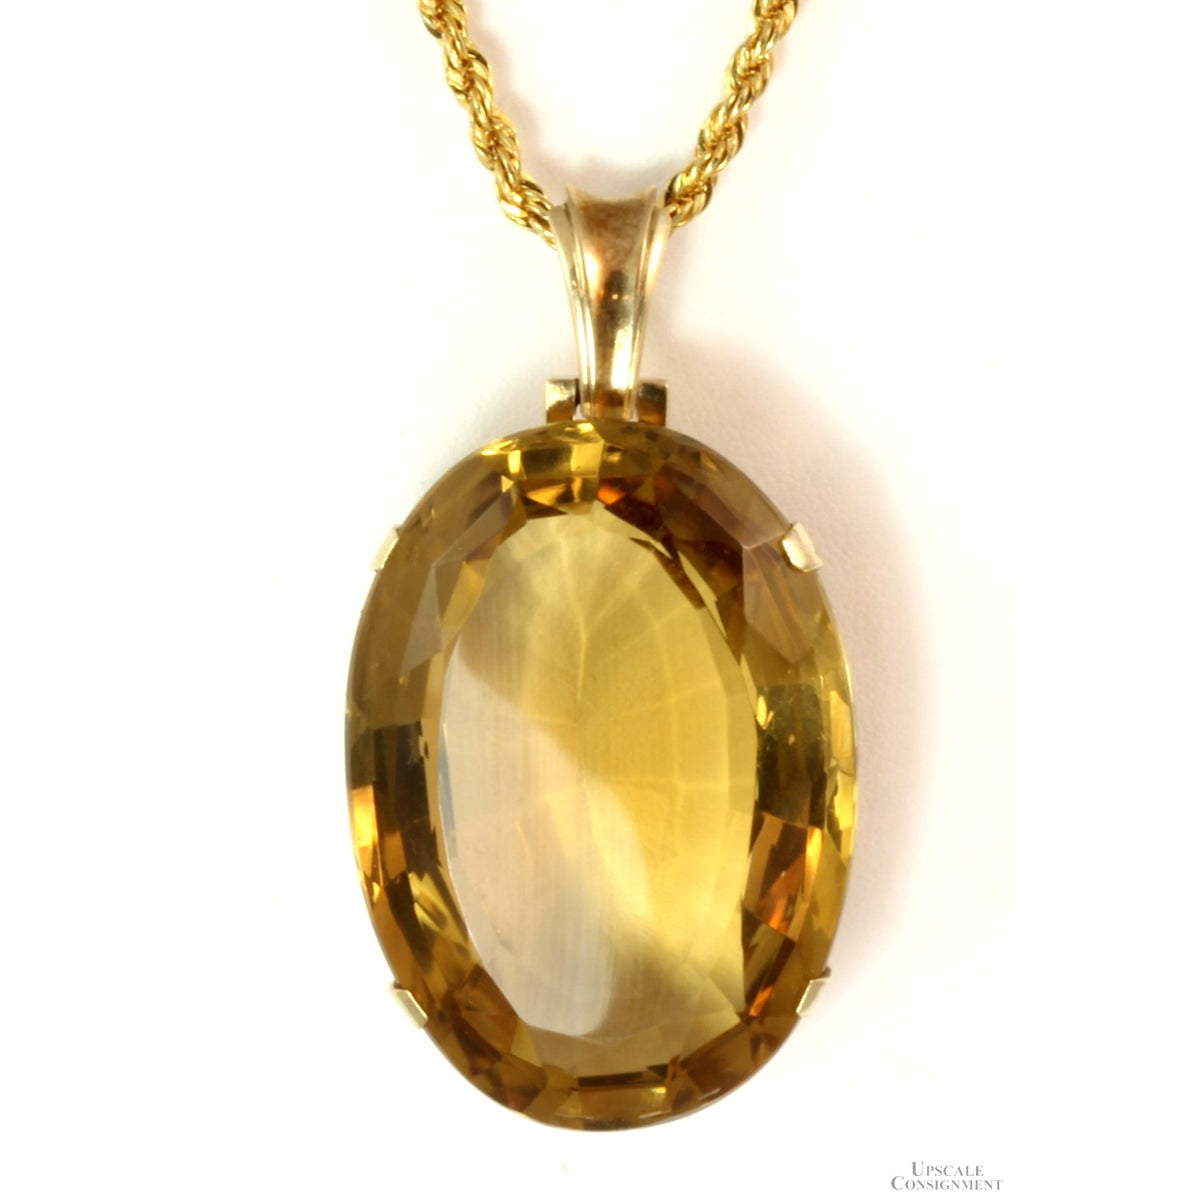 144.56ct Strong Yellow Citrine Gemstone Pendant Necklace